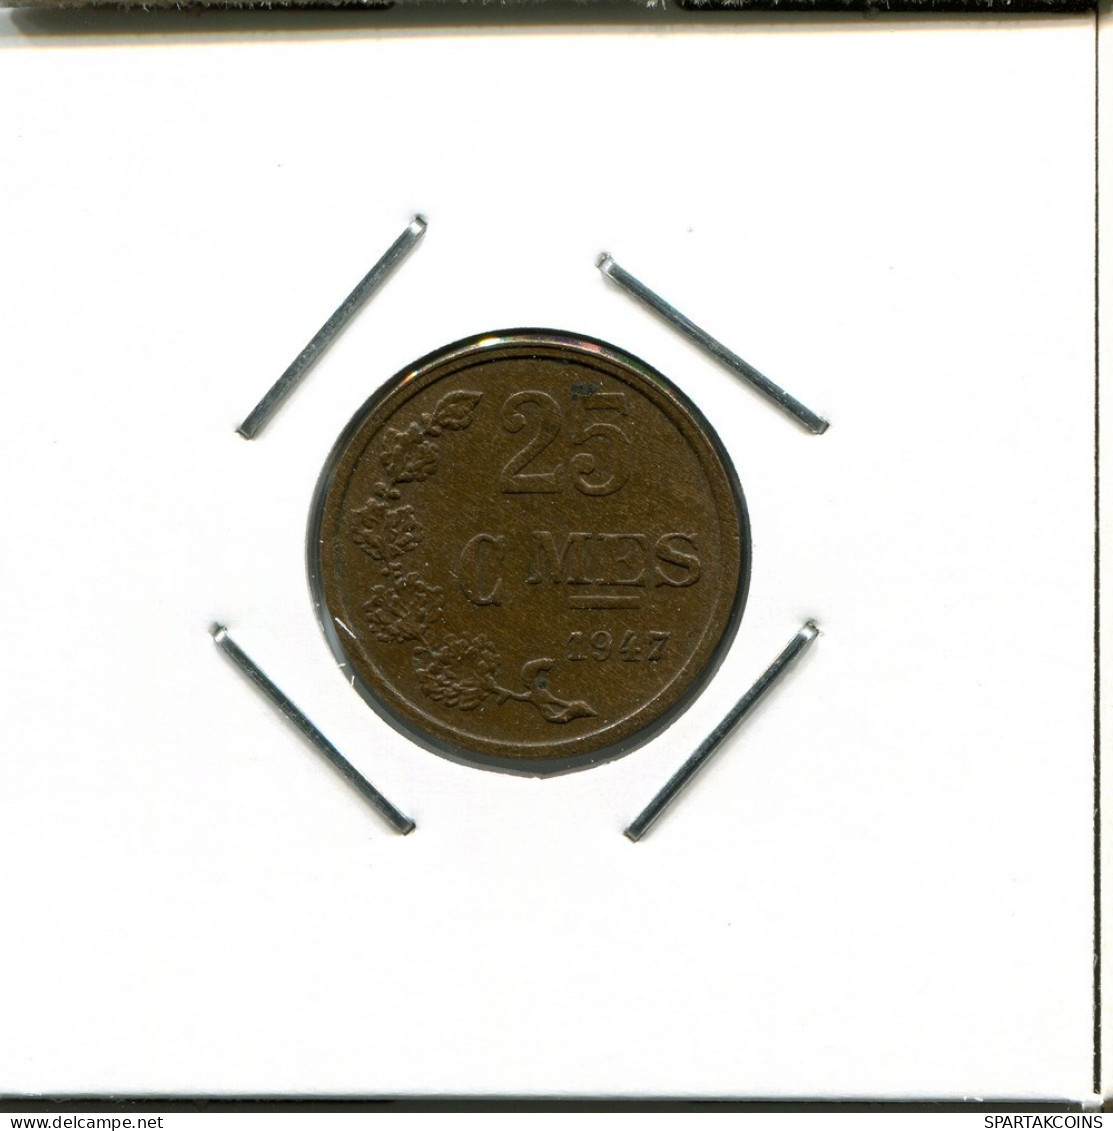 25 CENTIMES 1947 LUXEMBURG LUXEMBOURG Münze #AR679.D.A - Luxembourg